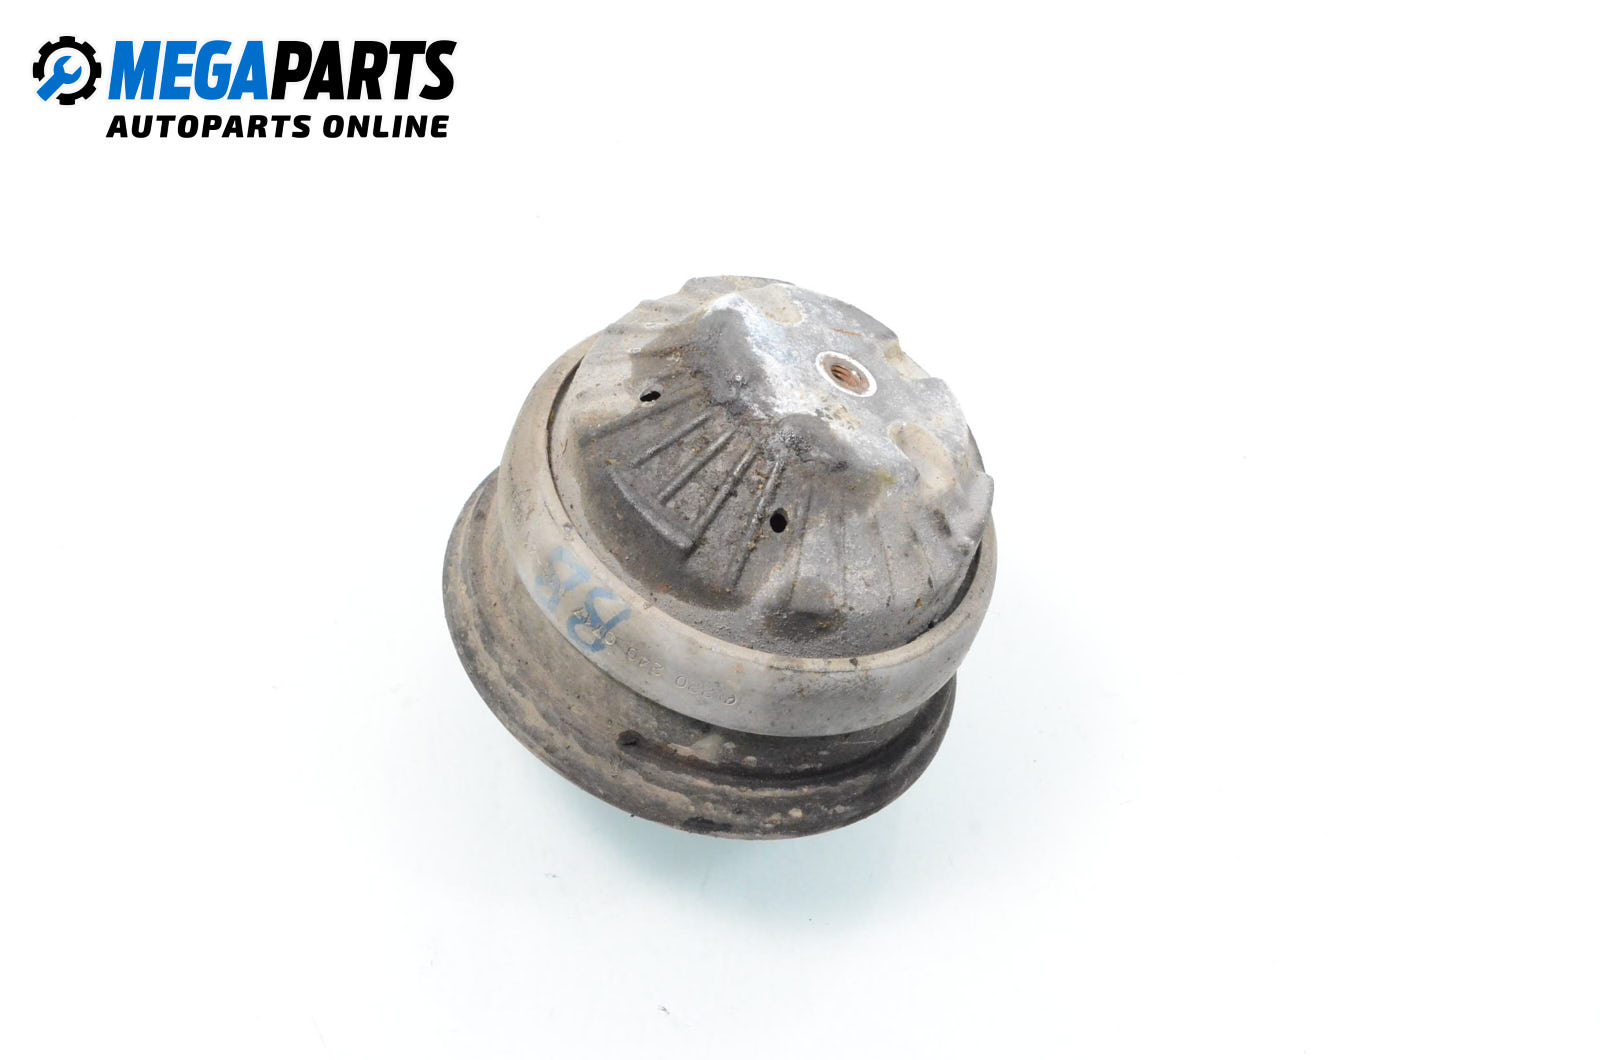 Engine bushing for Mercedes-Benz S-Class Sedan (W220) (10.1998 - 08.2005) S 320 (220.065, 220.165), automatic